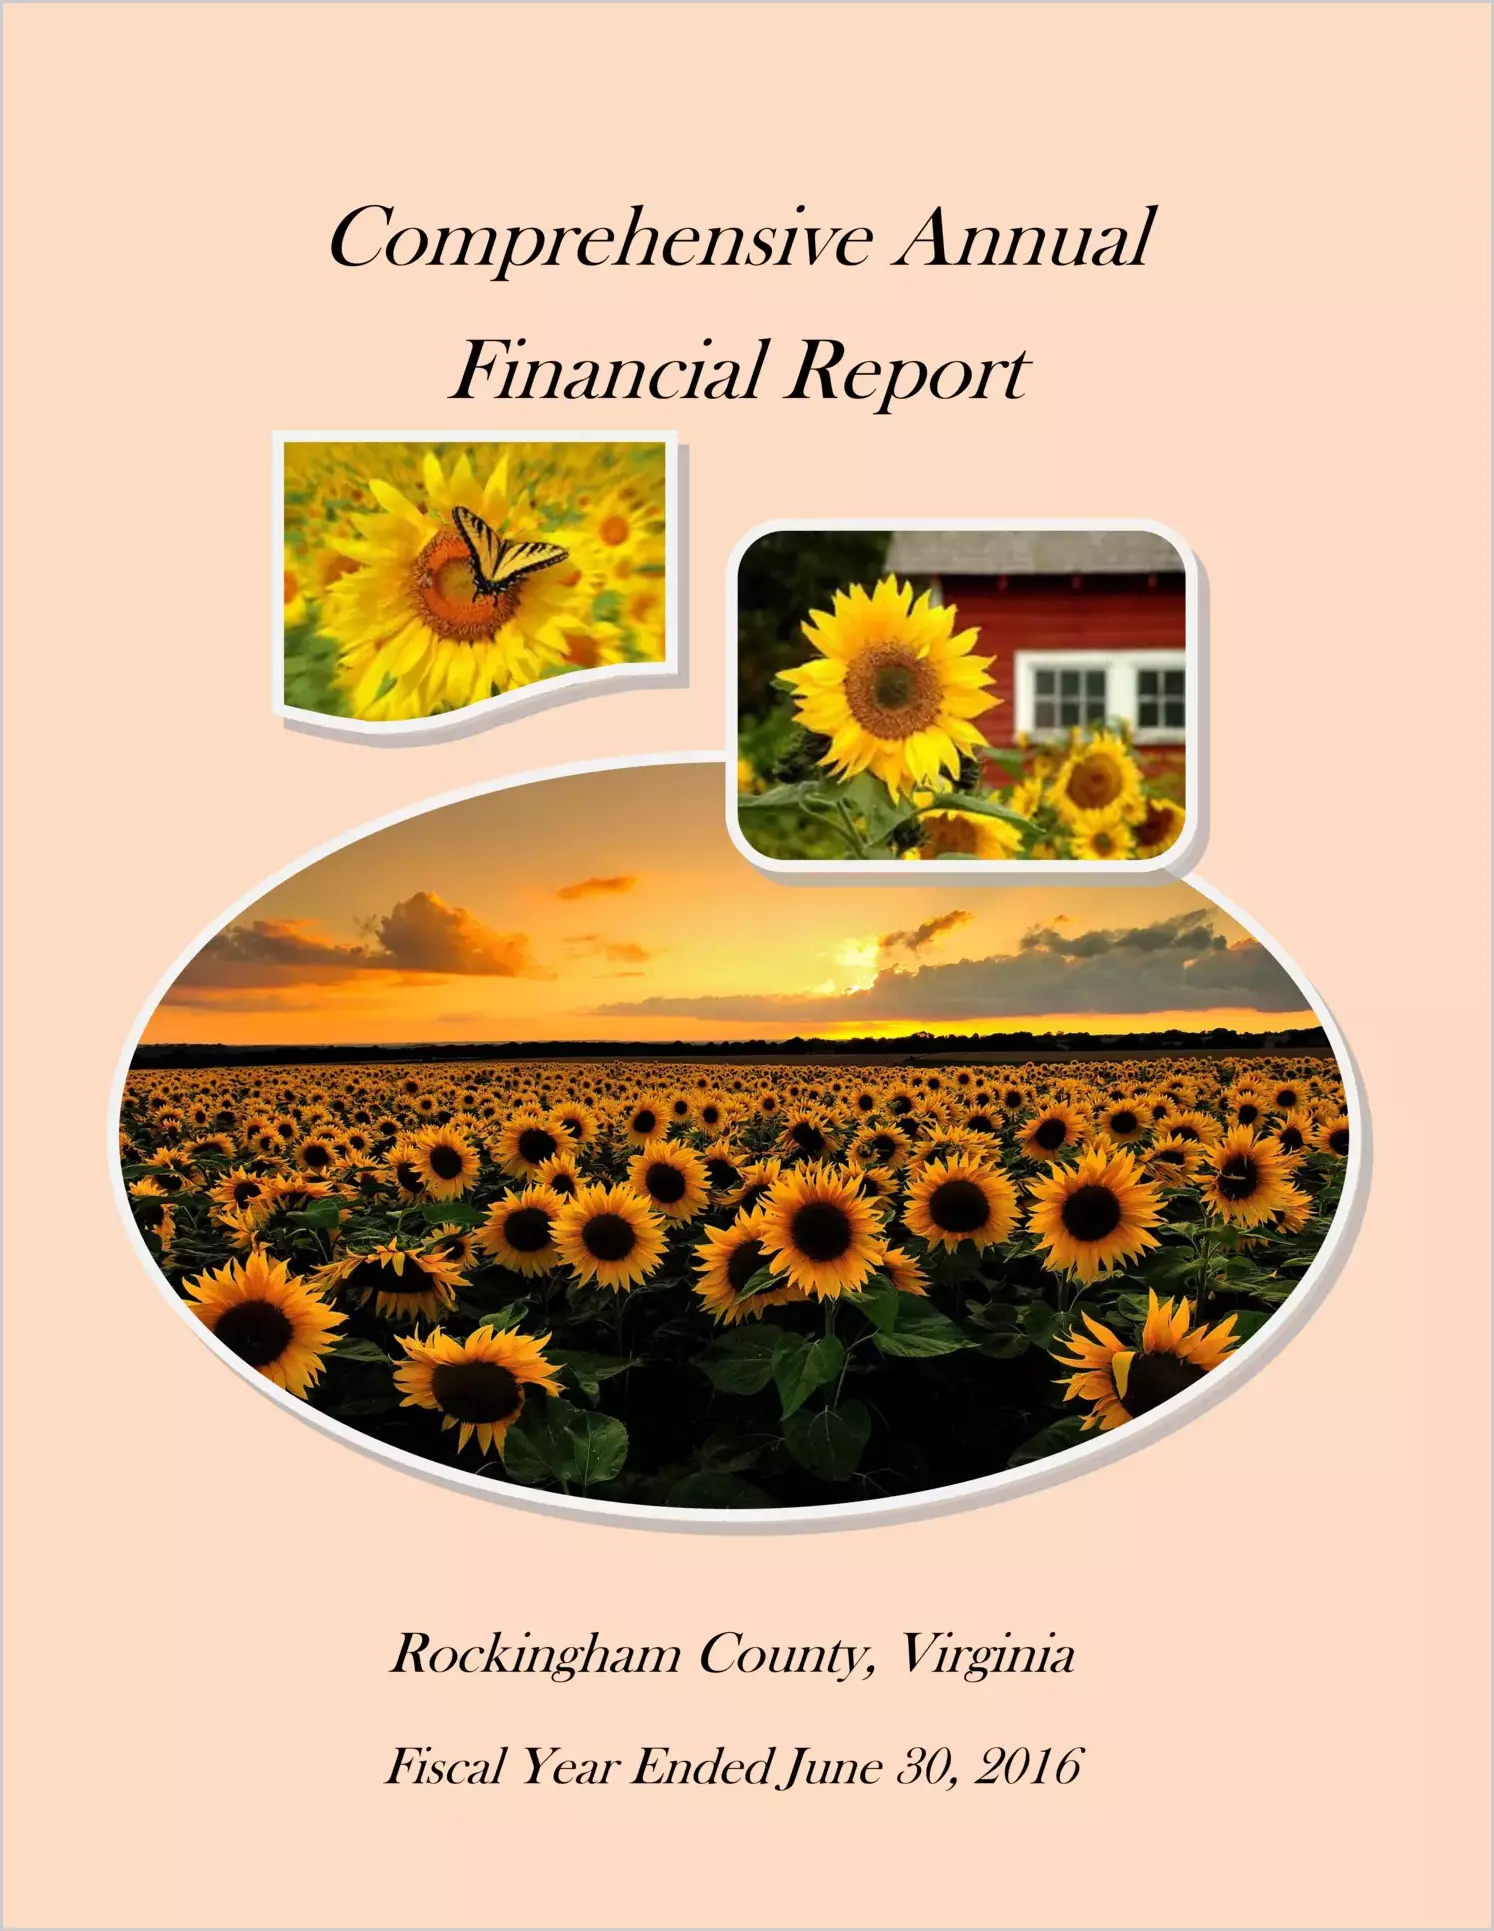 2016 Annual Financial Report for County of Rockingham